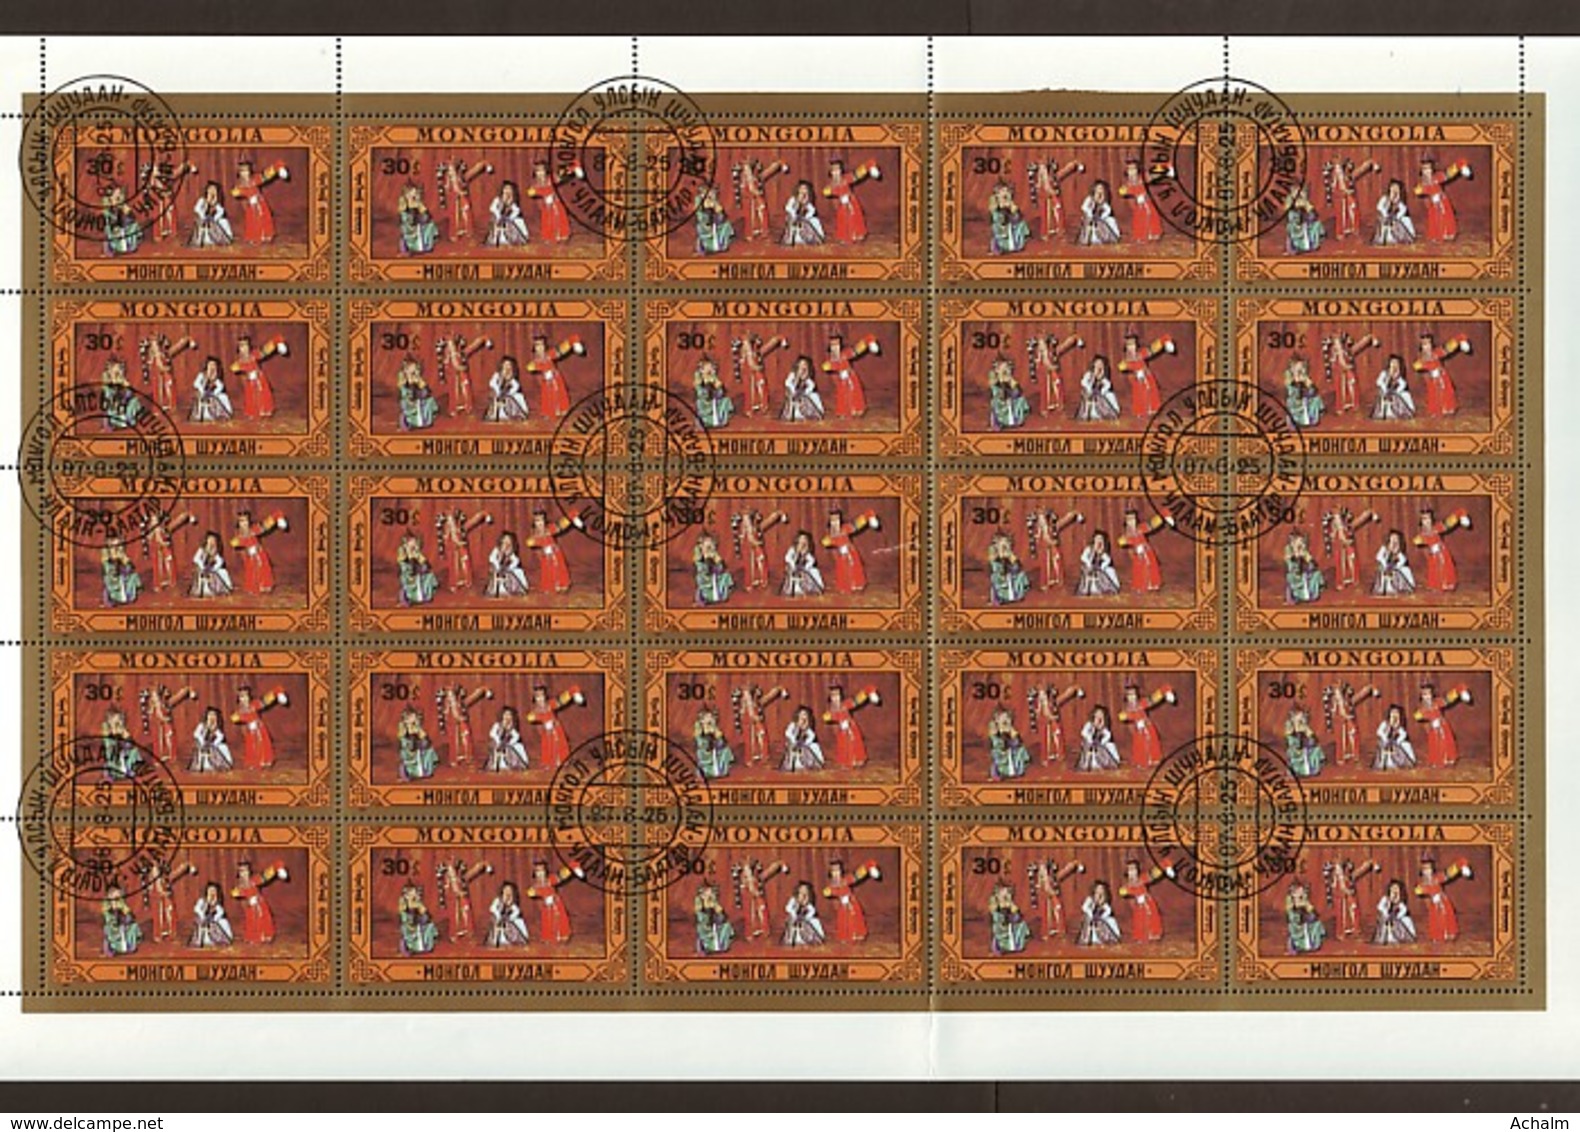 Mongolei/Mongolia Of 1987 - Sheet Of Stamps 25 X MiNr. 1886 Used - Folklore Dancers And Dance Groups - Mongolei